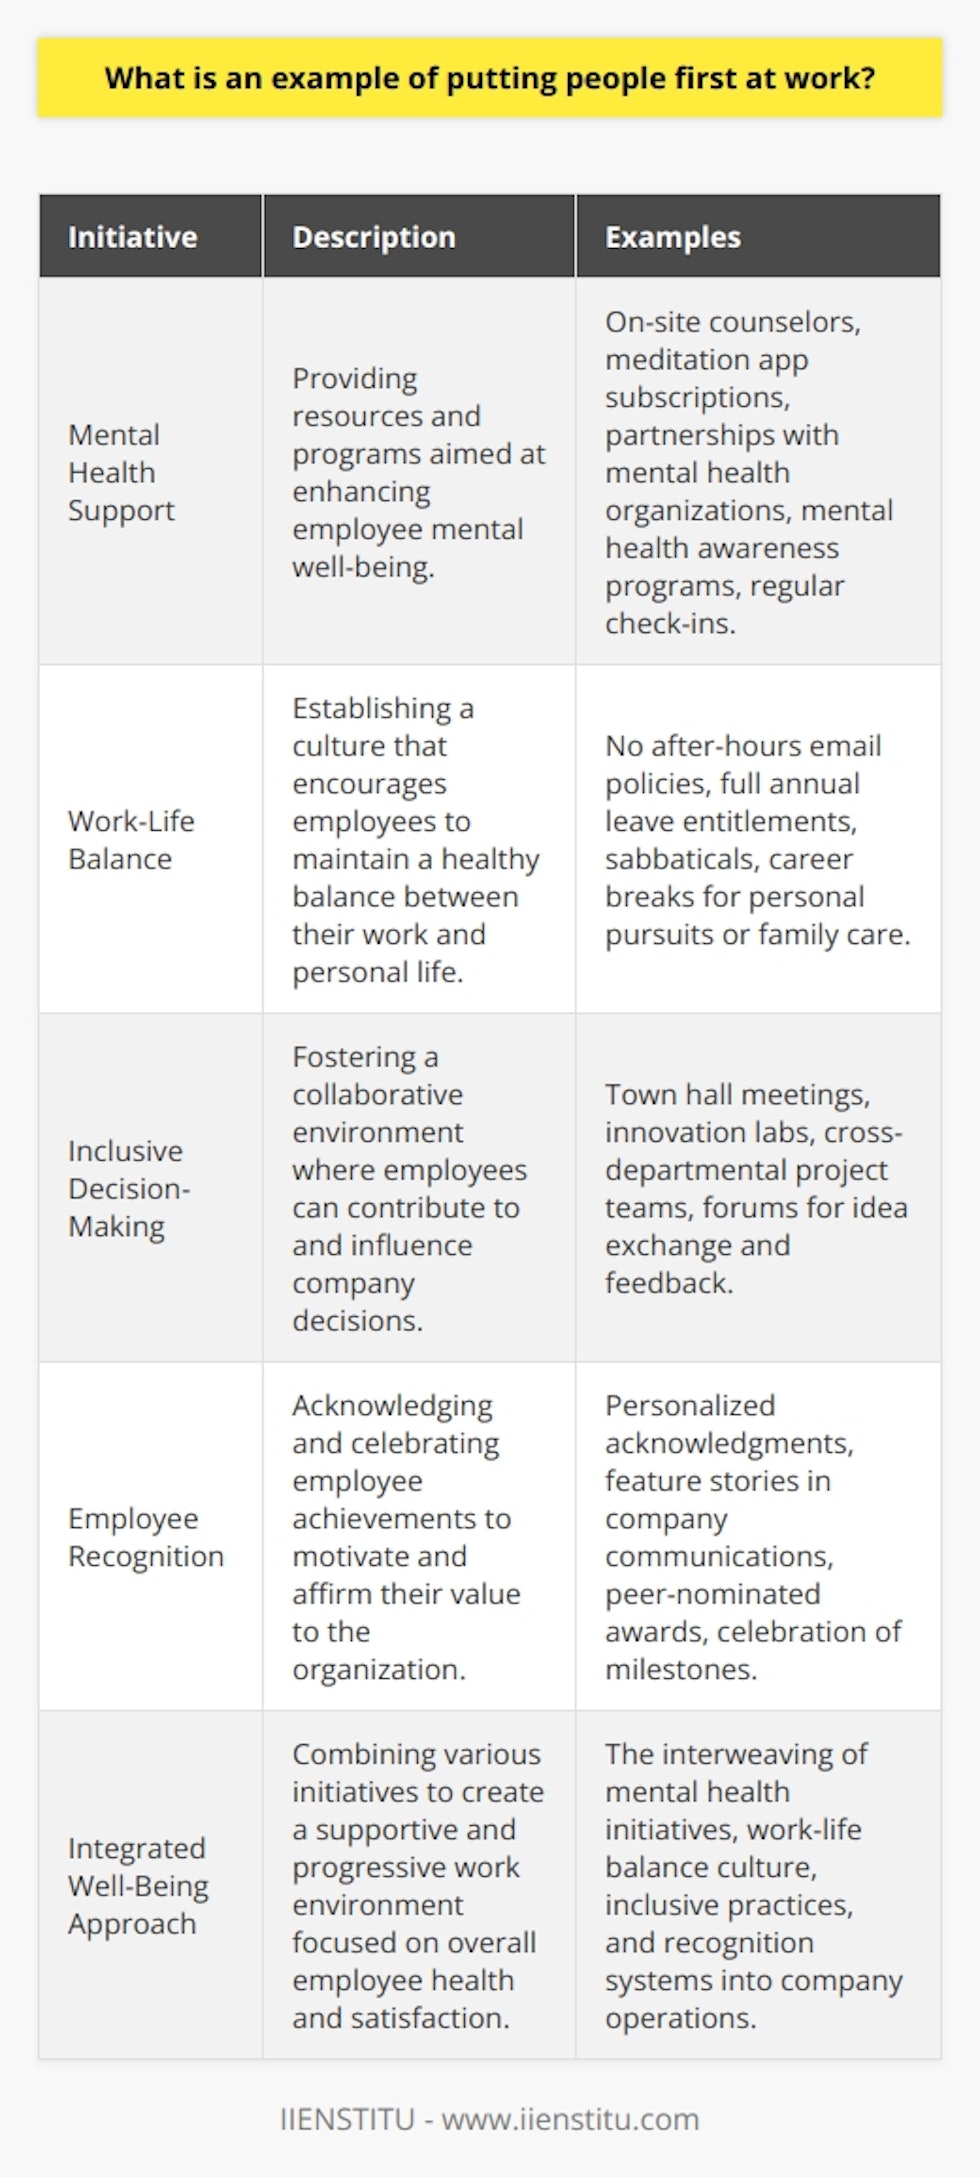 Prioritizing employee well-being is a key hallmark of people-first companies. One example of such a commitment can be seen through the introduction and persistence of mental health initiatives in the workplace. By offering resources like on-site counselors, subscriptions to meditation apps, or establishing partnerships with mental health organizations, employers signal that they understand the critical role mental well-being plays in overall job performance and satisfaction. For instance, initiating mental health awareness programs, and scheduling regular check-ins to provide a safe space for employees to discuss any challenges they face, both personally and professionally, can make a profound difference in the work environment.Encouraging work-life balance is another powerful indication of putting people first. This goes beyond allowing flexible working hours; it's about creating a culture that acknowledges and respects the individual needs of each employee. Examples include instituting no after-hours email policies, encouraging employees to take their full annual leave entitlements, and facilitating opportunities for sabbaticals or career breaks to pursue personal goals or care for family without professional penalty. This holistic approach to work-life balance speaks volumes about an organization's dedication to its people's overall well-being.Inclusion in decision-making processes takes the concept of a democratic workplace from theory to practice. Rather than top-down mandates, people-first companies often embrace collaborative platforms where ideas can be openly discussed and deliberated. This may take the shape of regular town hall meetings, innovation labs, or cross-departmental project teams that address real company challenges. By valuing diverse viewpoints and showcasing a willingness to act on employee feedback, employers can strengthen a sense of community and shared purpose within the workplace.Recognition of employee success serves both as a motivator and an affirmation of an individual's value to the organization. This can transcend monetary bonuses and include personalized acknowledgment from leadership, feature stories in company communications, or peer-nominated awards. Employers that institutionalize the celebration of milestones and accomplishments, both big and small, foster an environment where people feel genuinely seen and valued.By intertwining mental health support, well-balanced work opportunities, inclusive communication practices, and consistent recognition into the fabric of their operations, organizations not only advocate for a better quality of life for their employees but also enhance their brand as progressive, desirable places to work. Through these efforts, companies can achieve a sustainable model where employee well-being is intricately linked to business success.